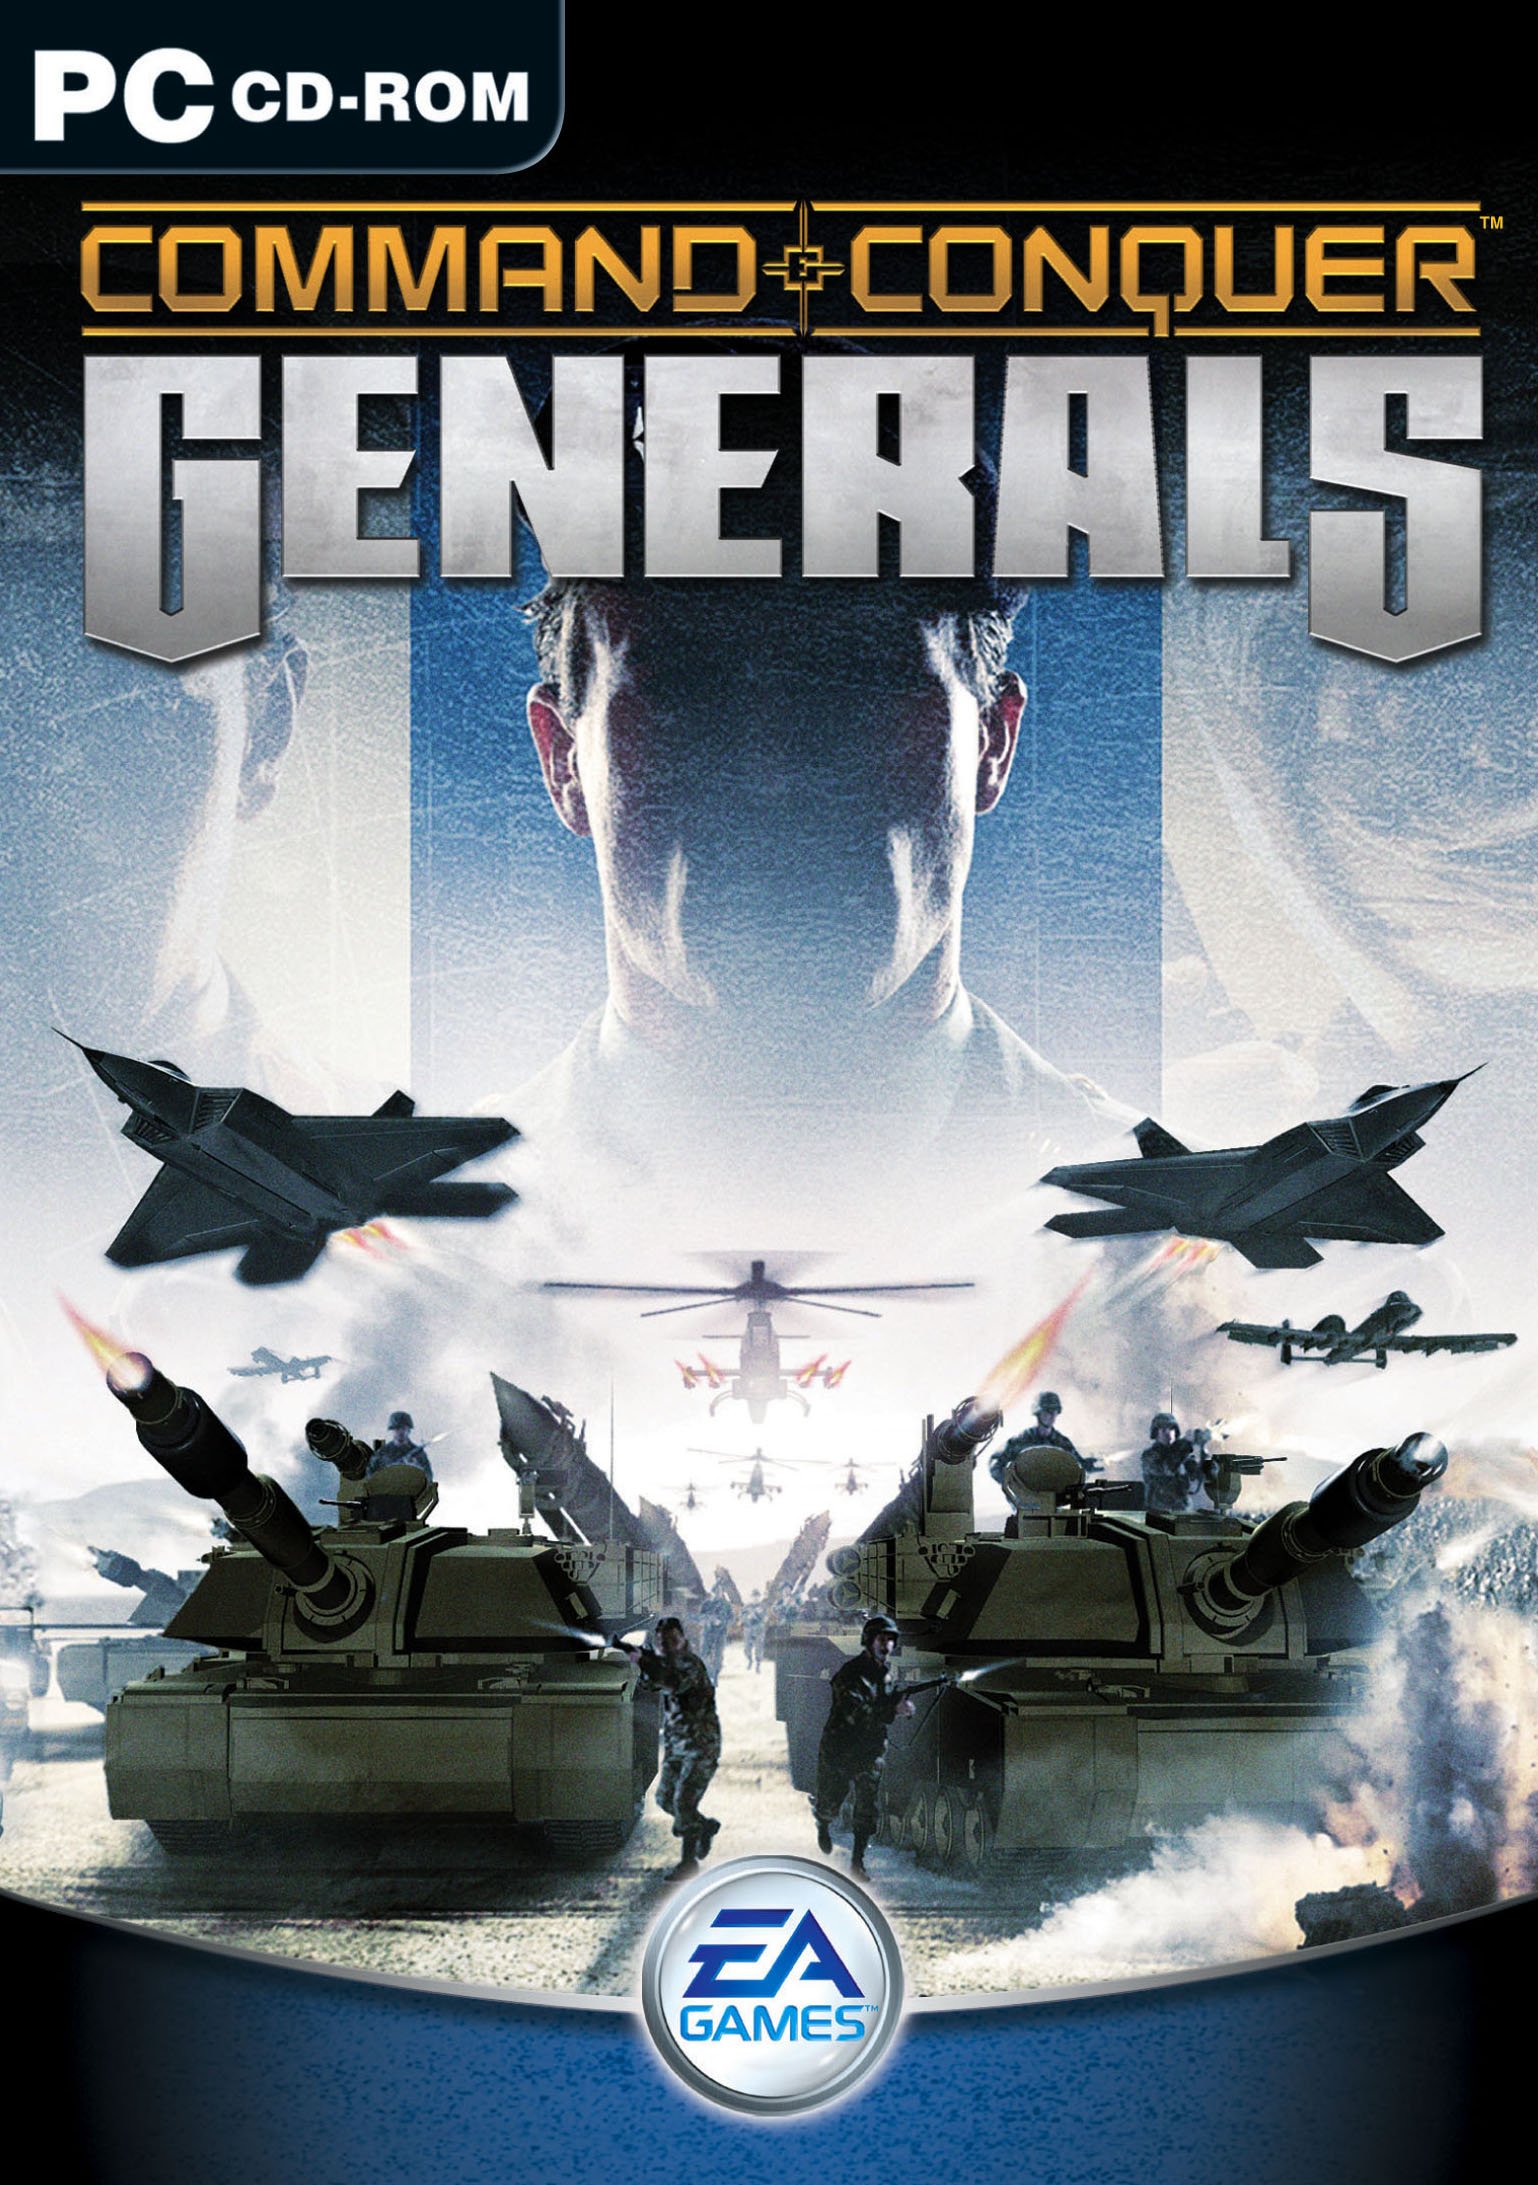 Command Conquer: Generals Command Conquer Wiki covering